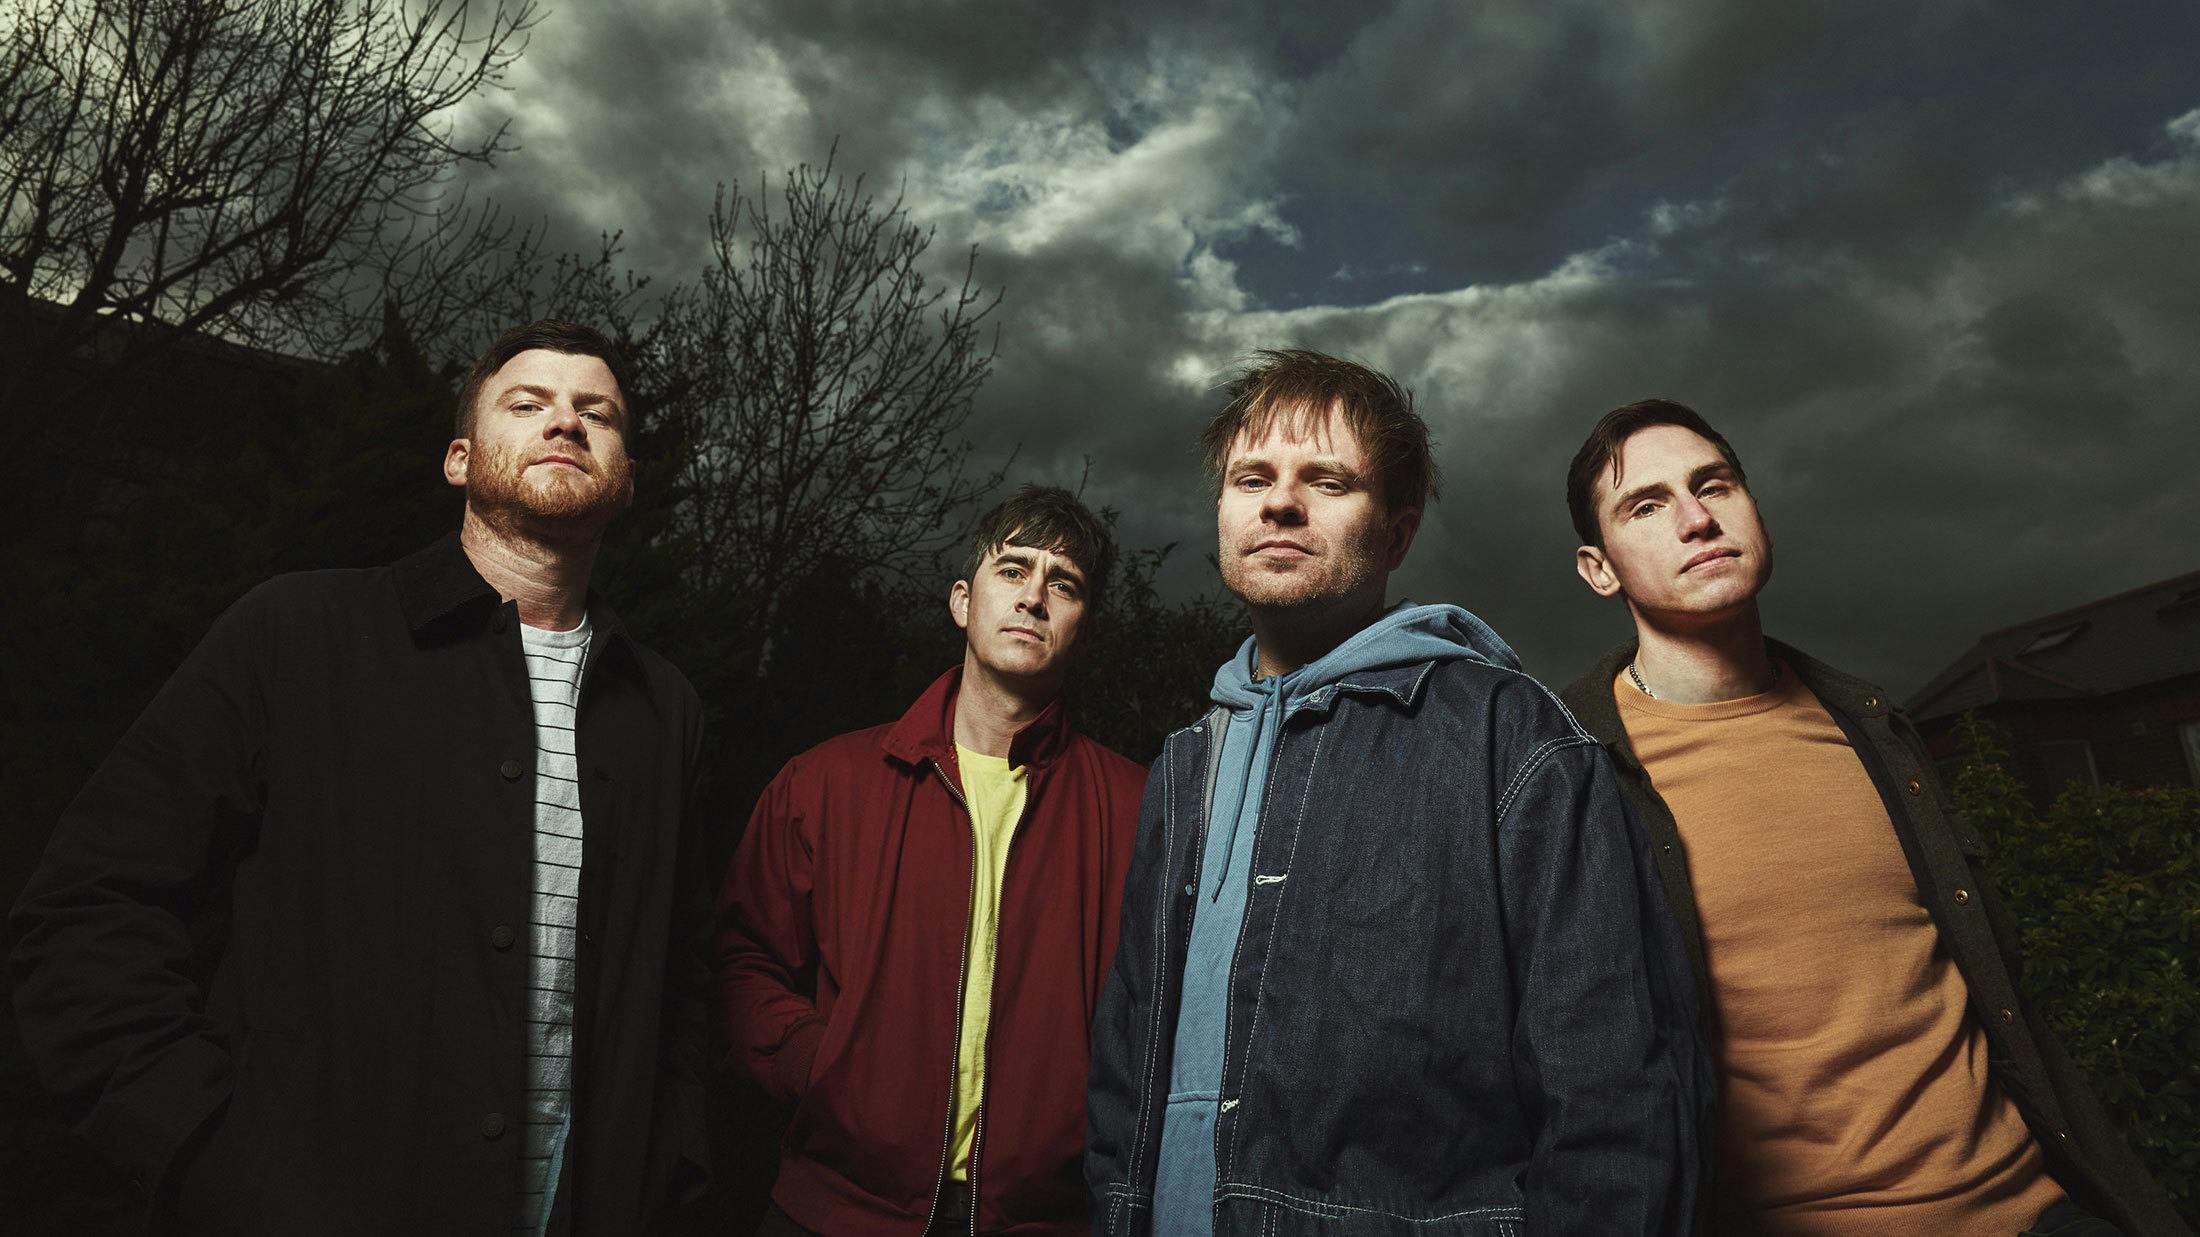 “An exploration into human possibility”: Inside Enter Shikari’s most ambitious album yet